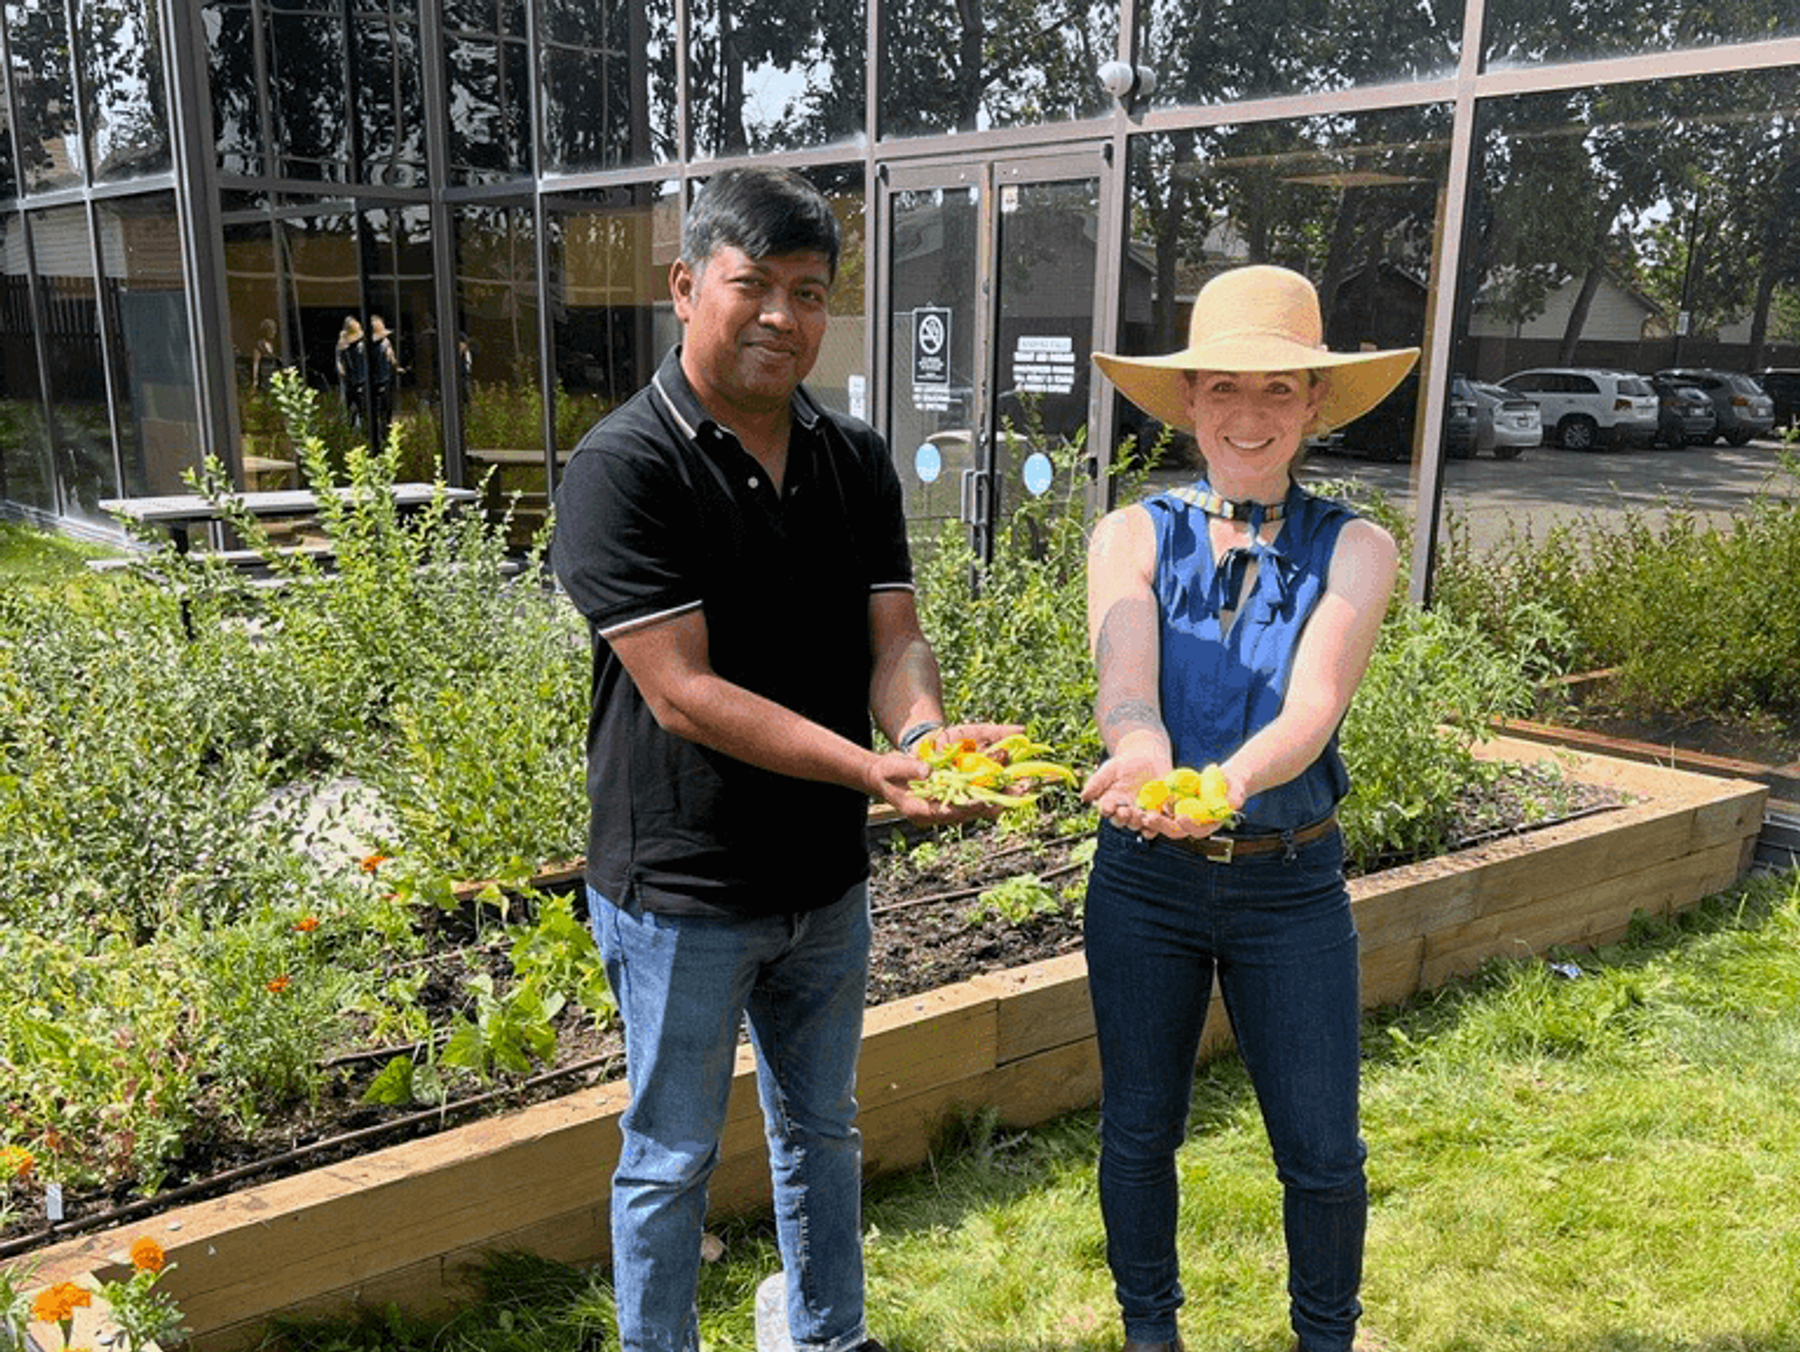 A man in a black shirt and a woman in a blue shirt and wide-brimmed hat show off vegetables picked from a community garden.